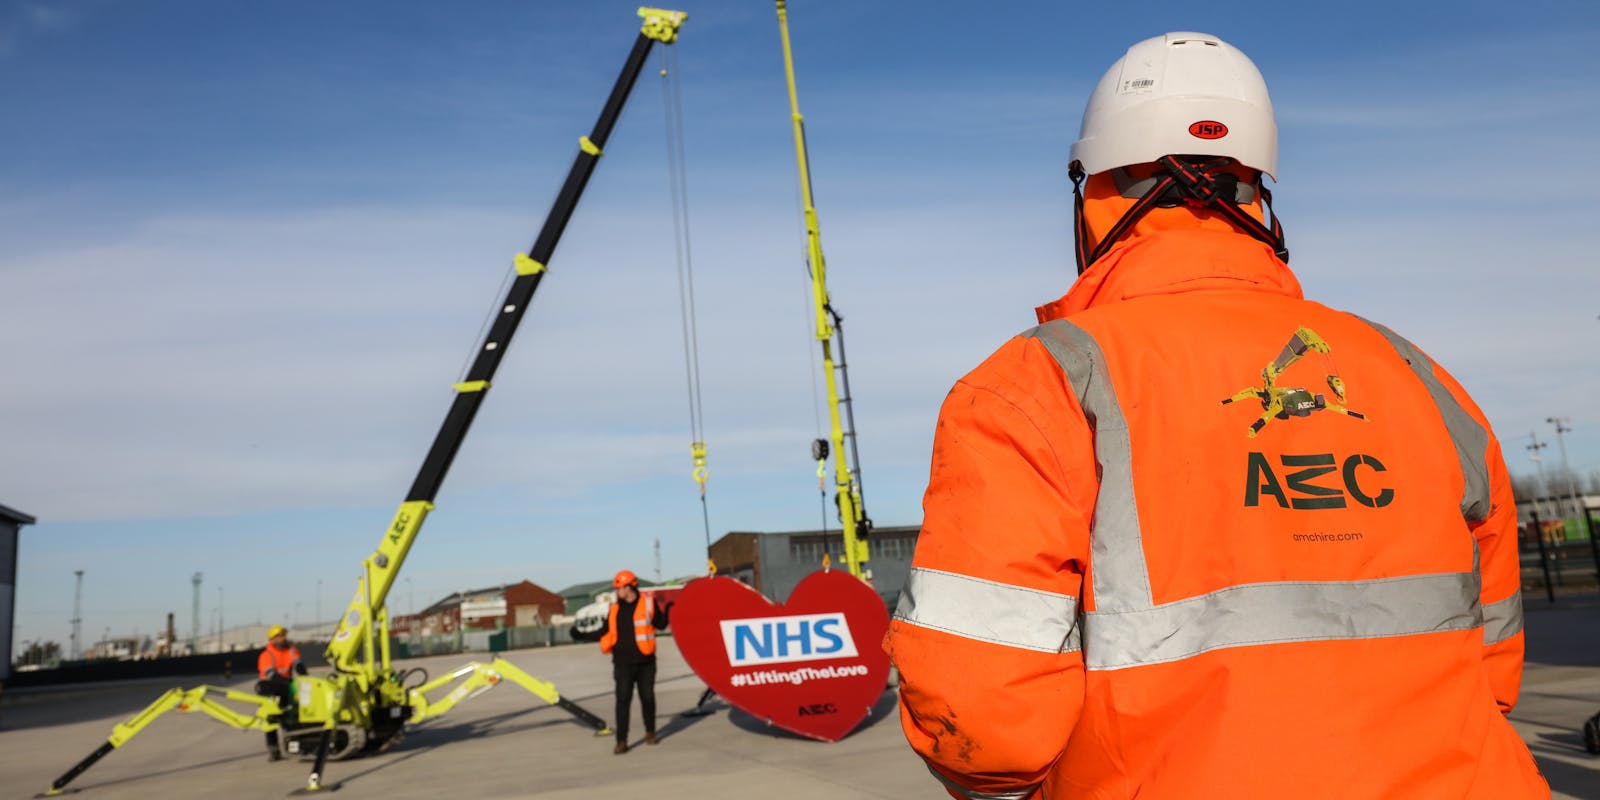 AMC c6e electric crane and MC285e lift giant nered heart for NHS R Charity